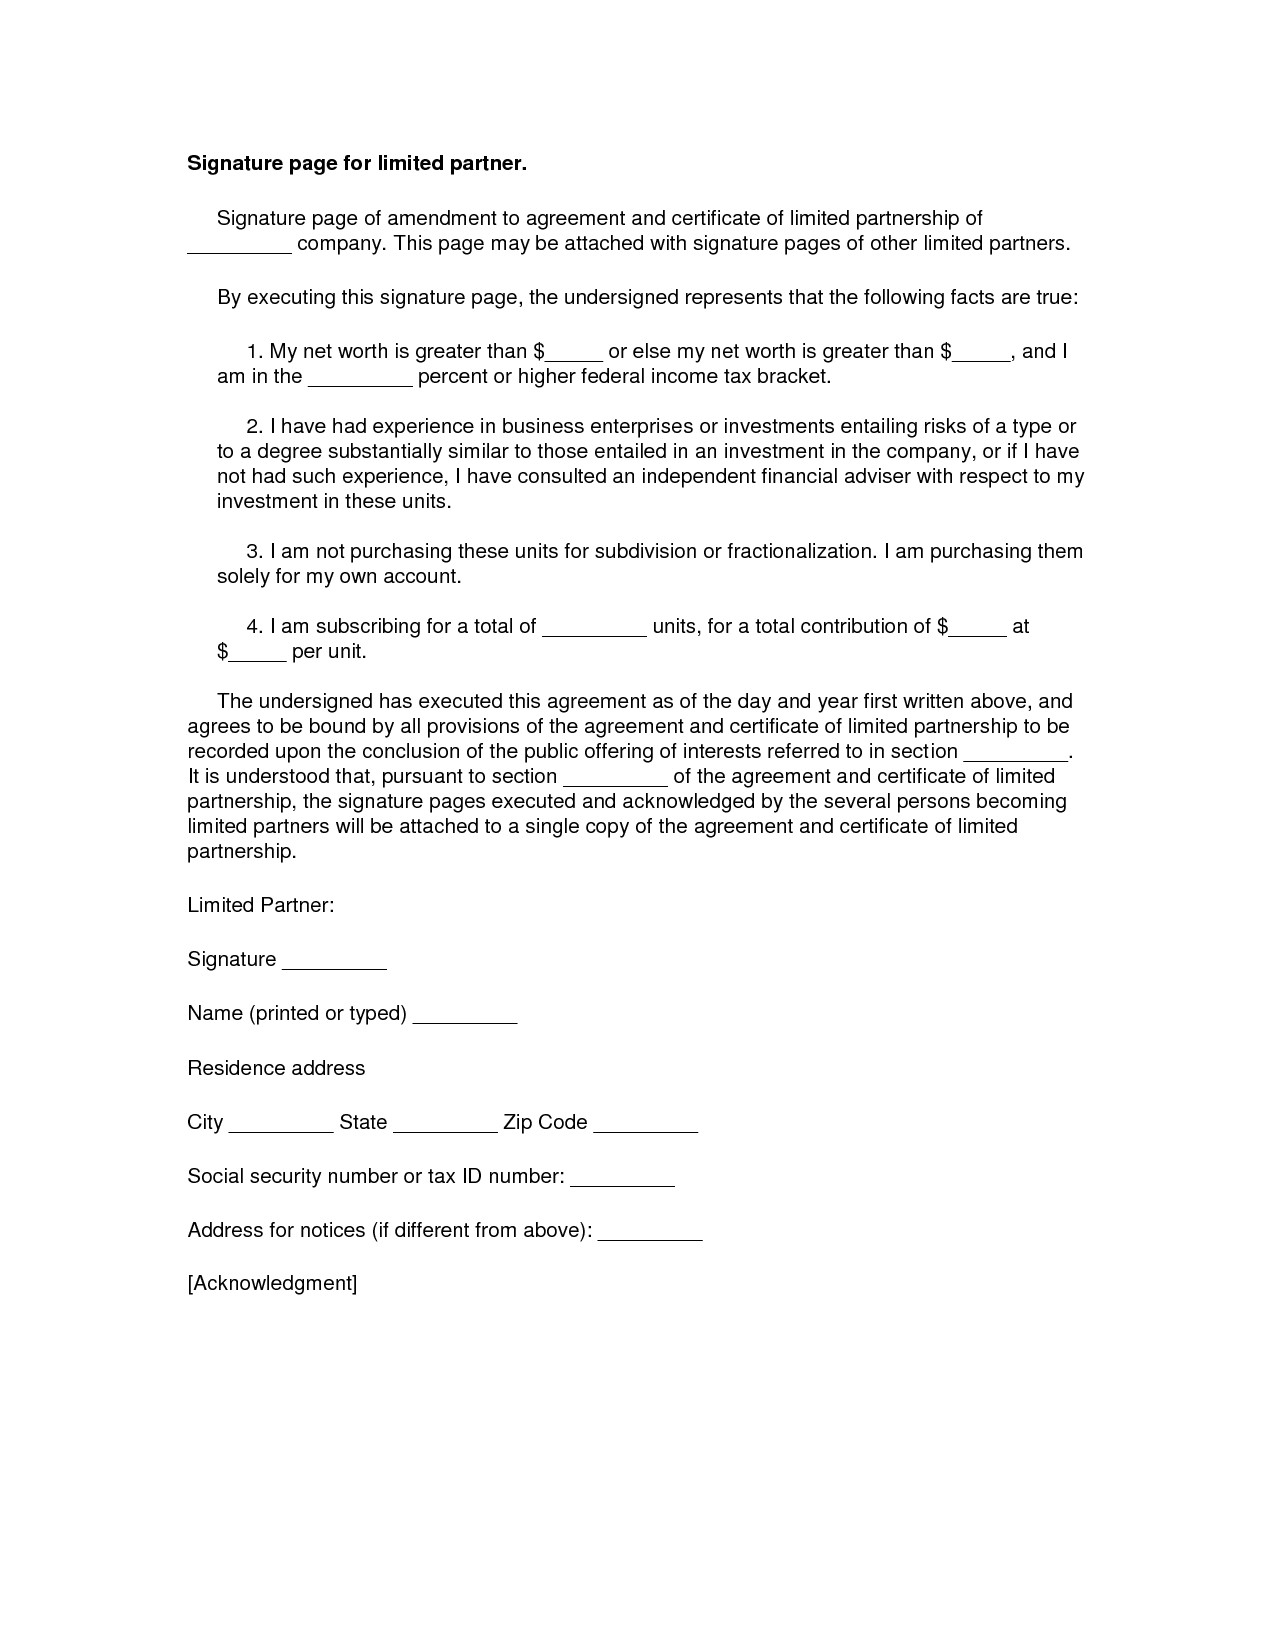 Contract Signature Page Template Contract Signature Page Example